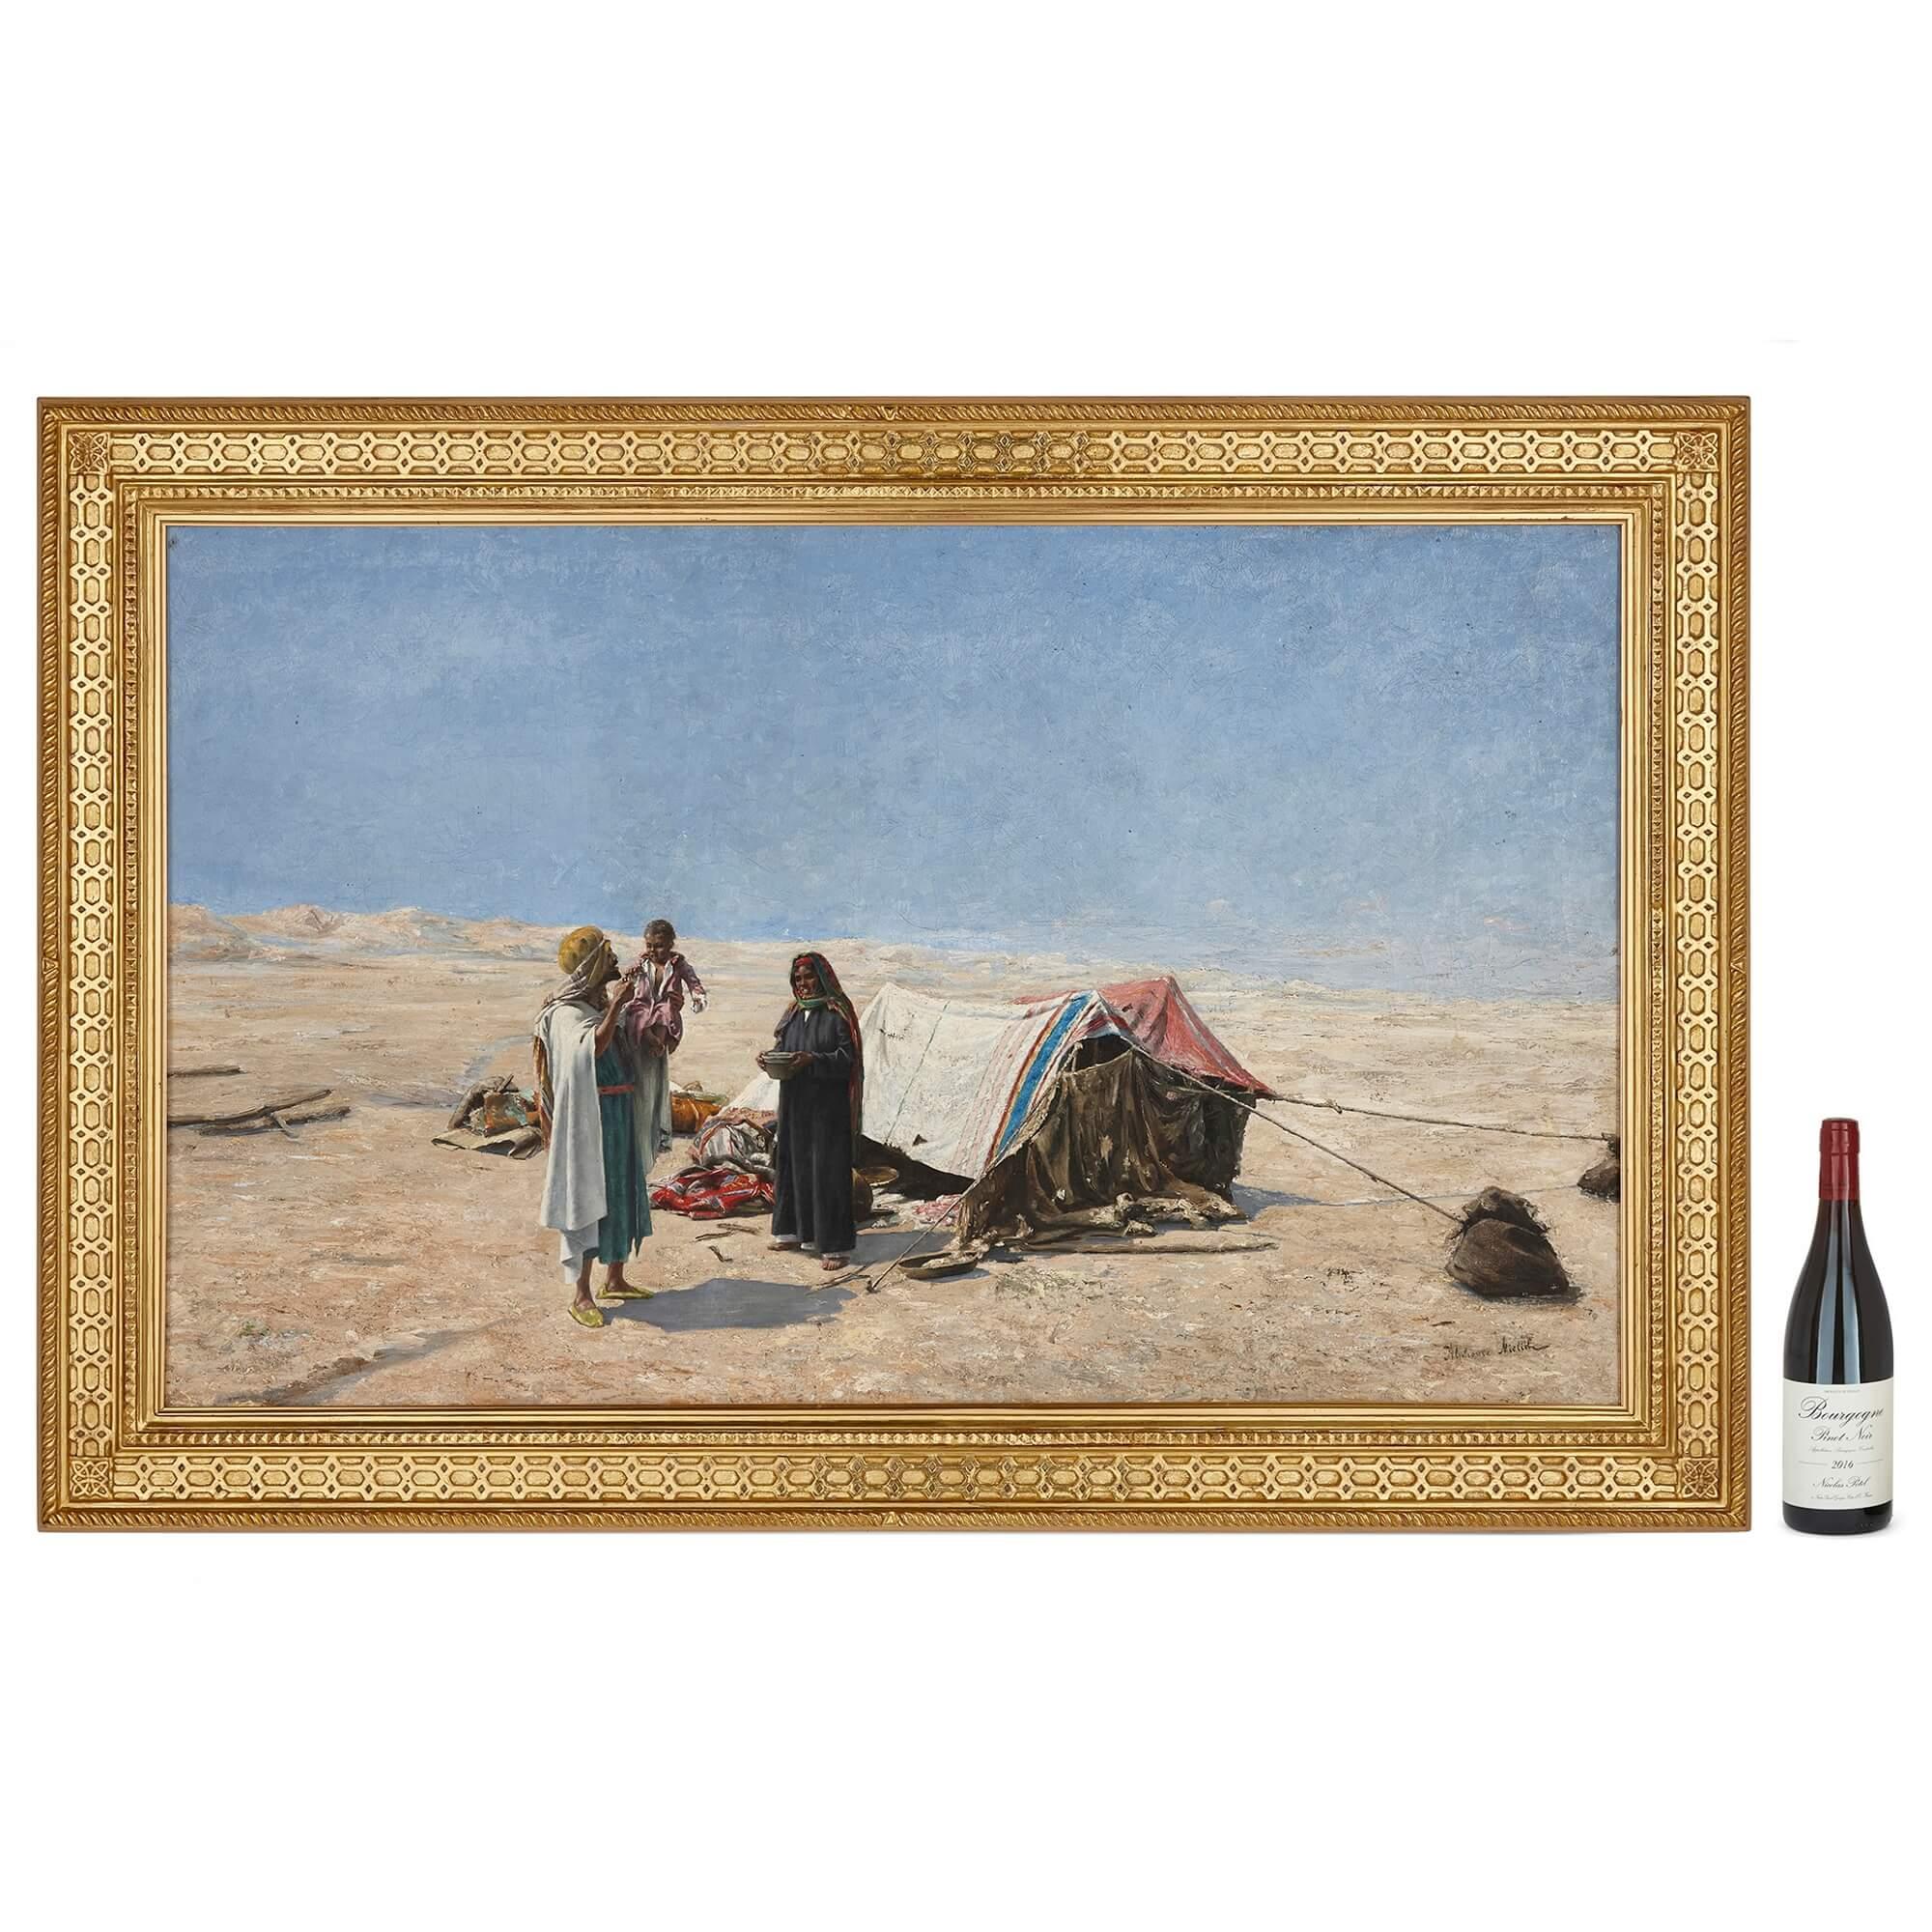 Orientalist Oil Painting of Bedouins in a Desert by Alphons Leopold Mielich For Sale 4